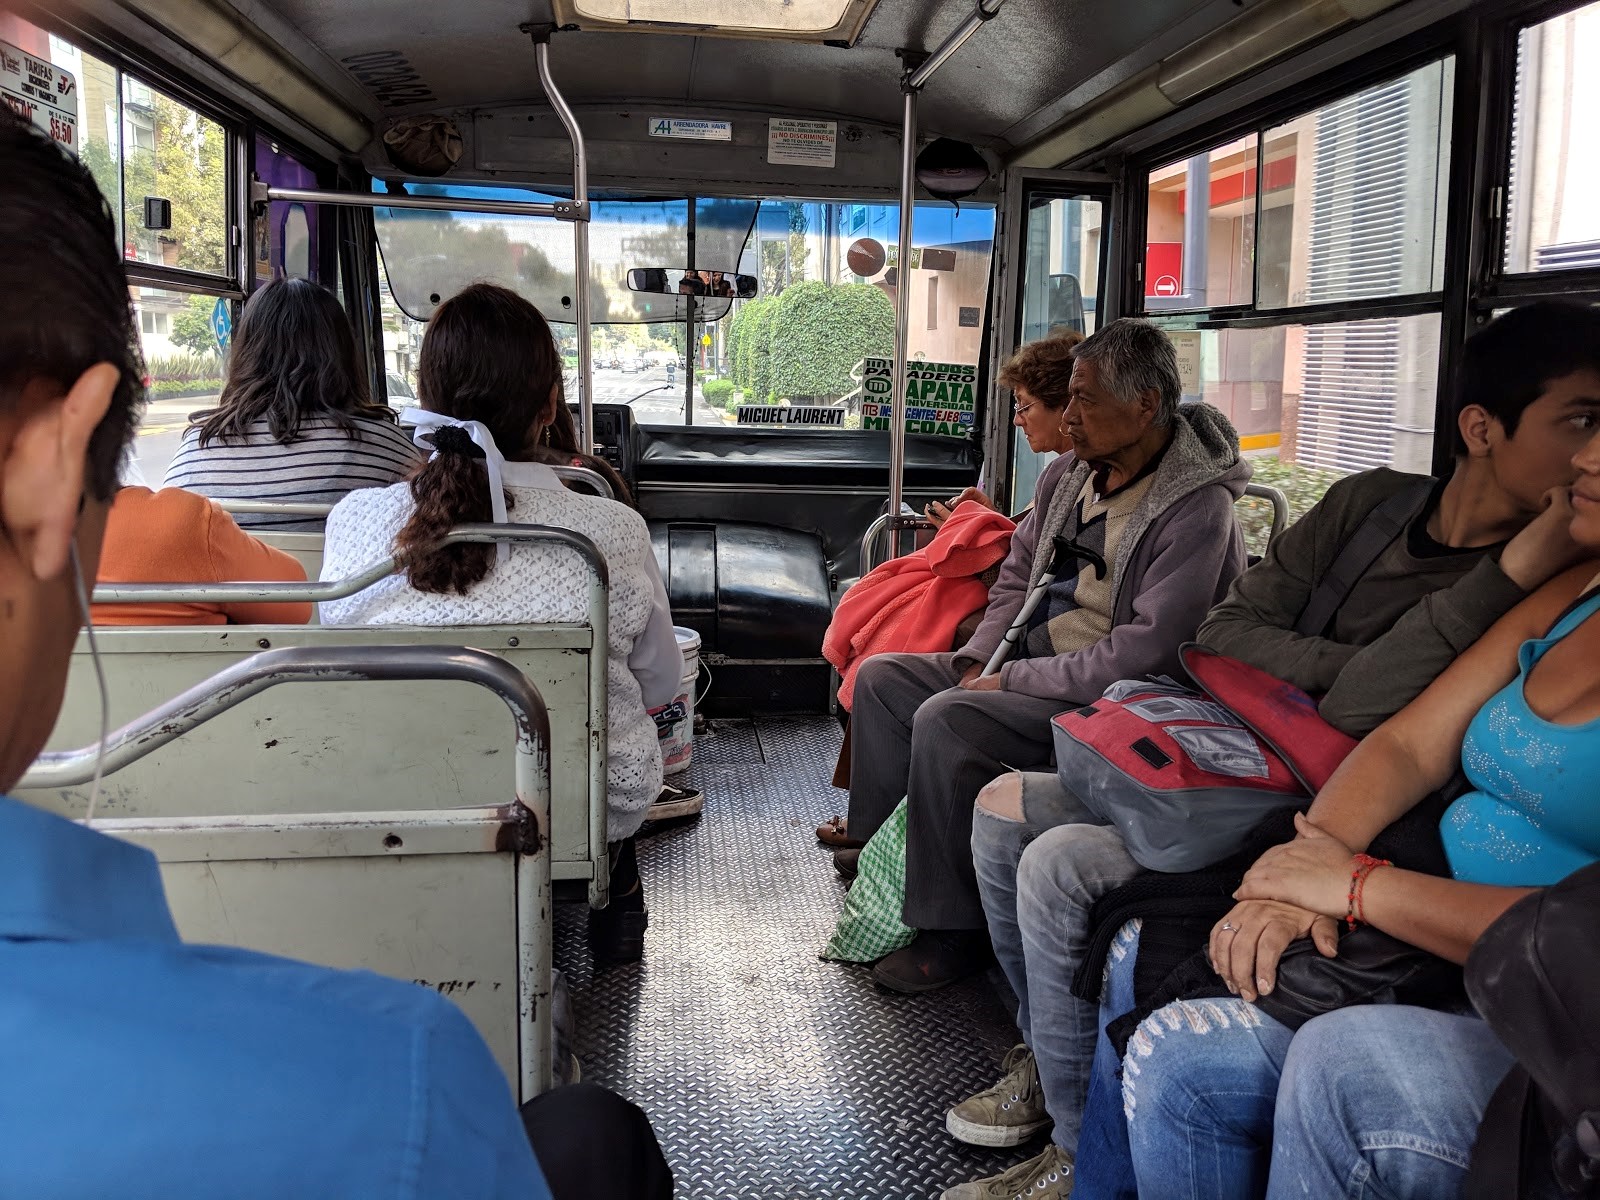 Peseros A Look Inside Mexico City S Private Bus Network Scott Beyer